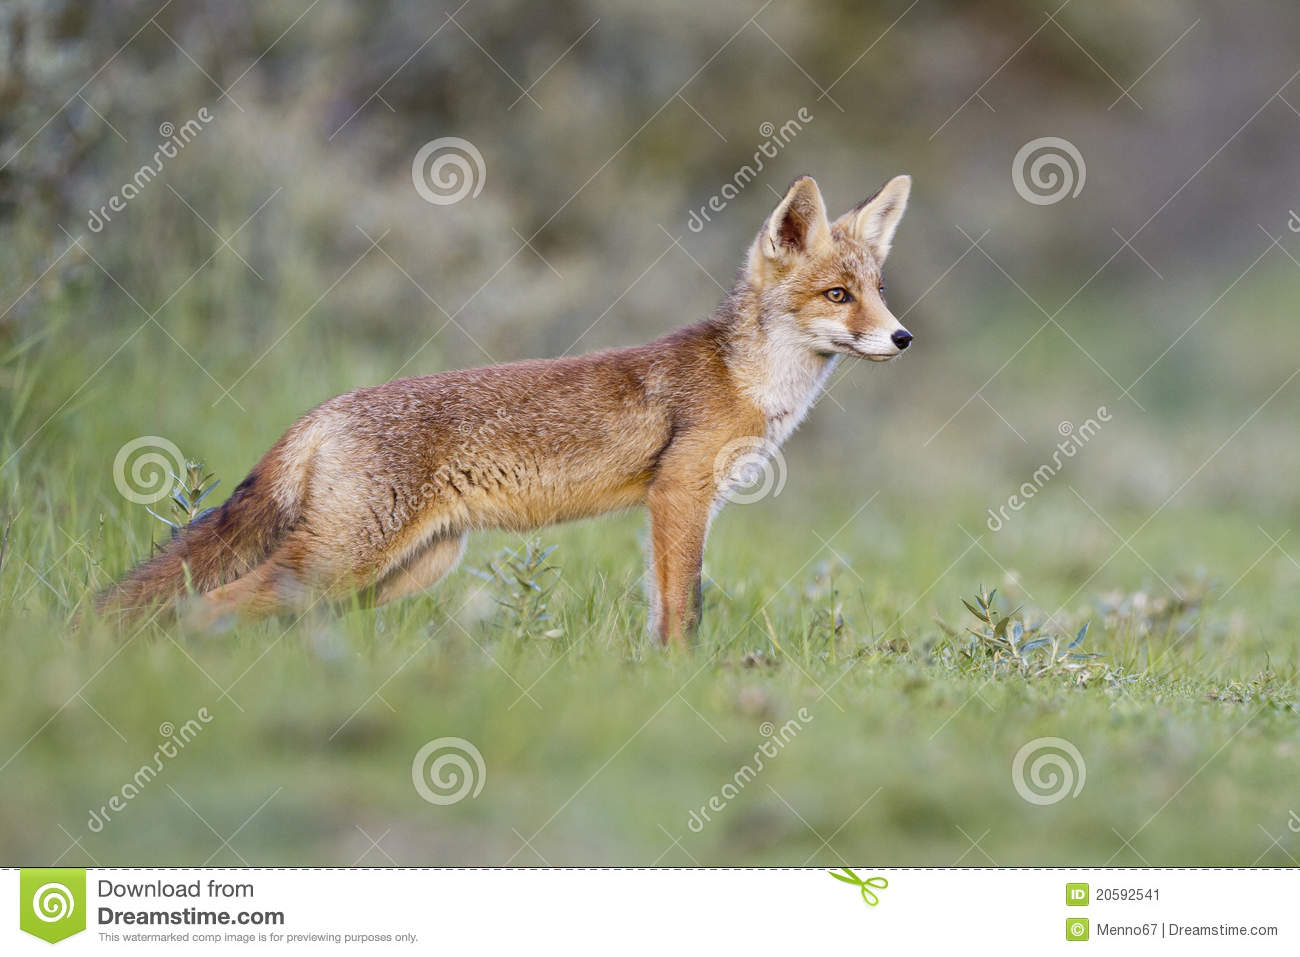 Little Red Fox Stock Image   Image  20592541